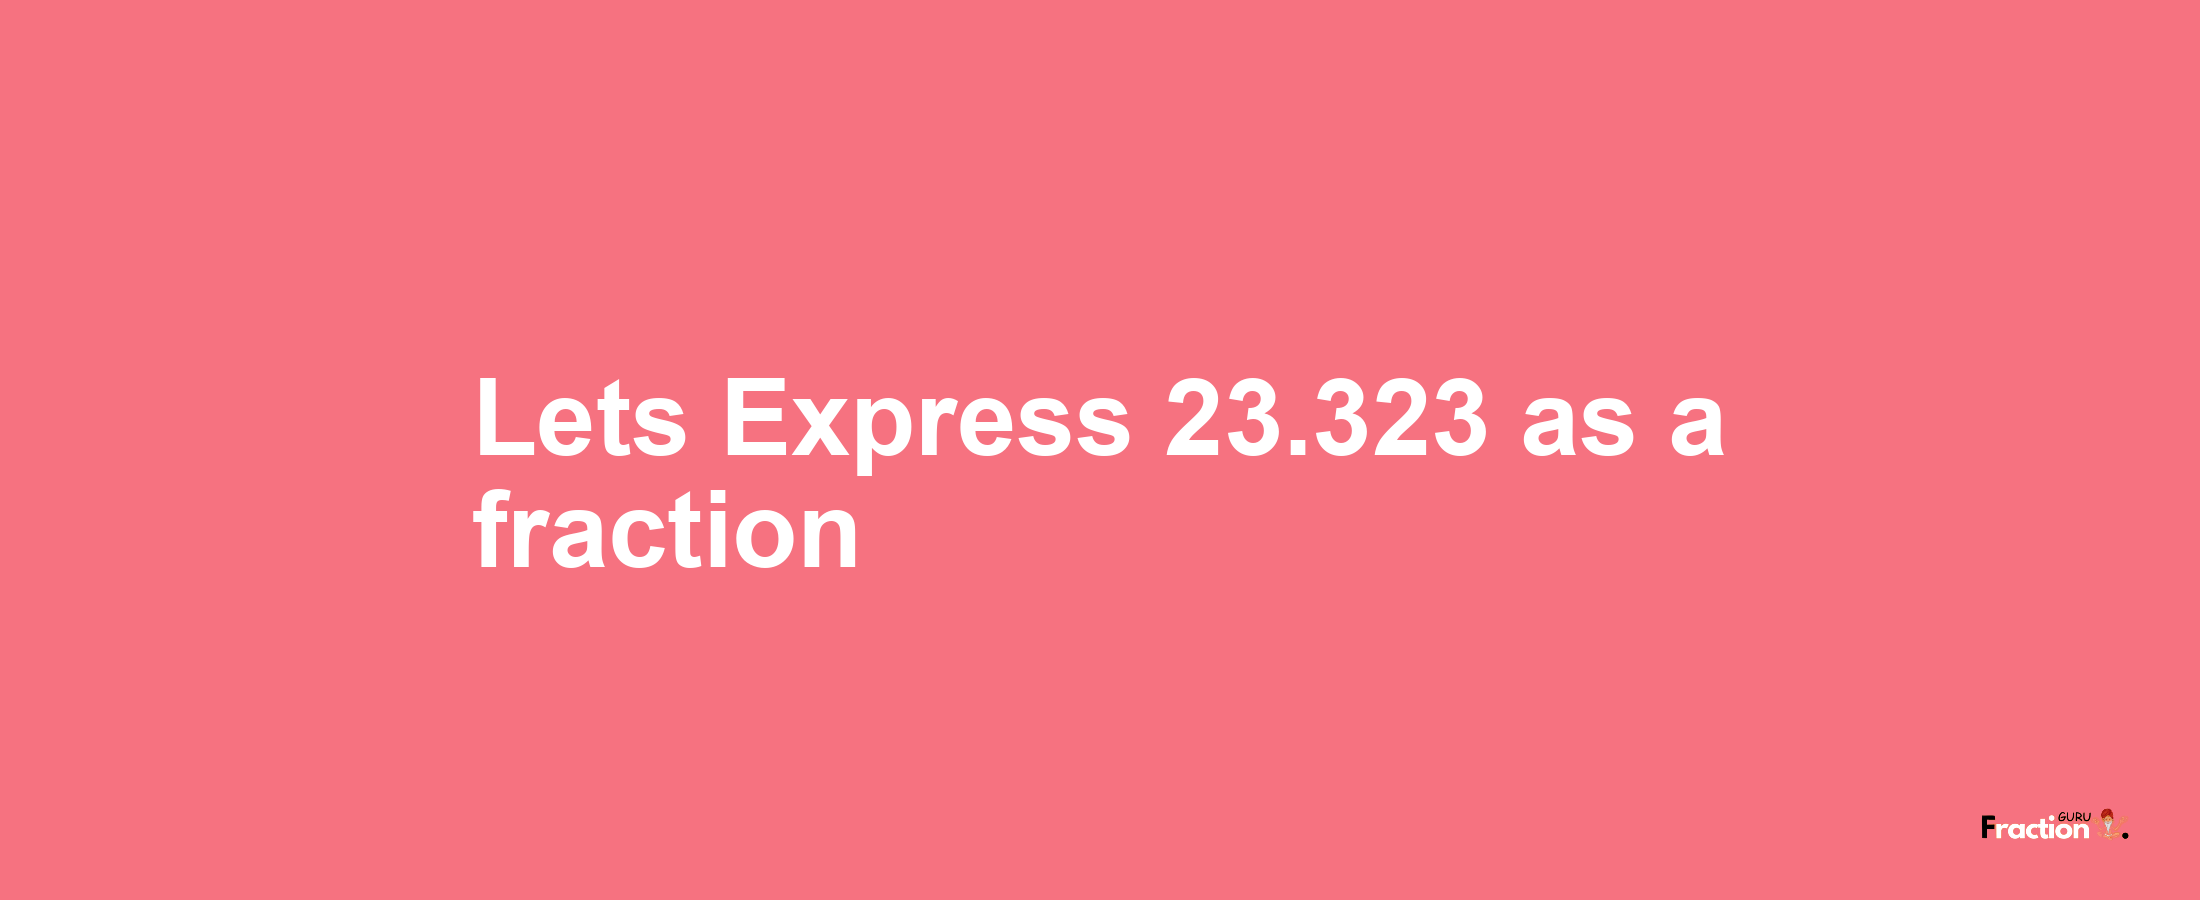 Lets Express 23.323 as afraction